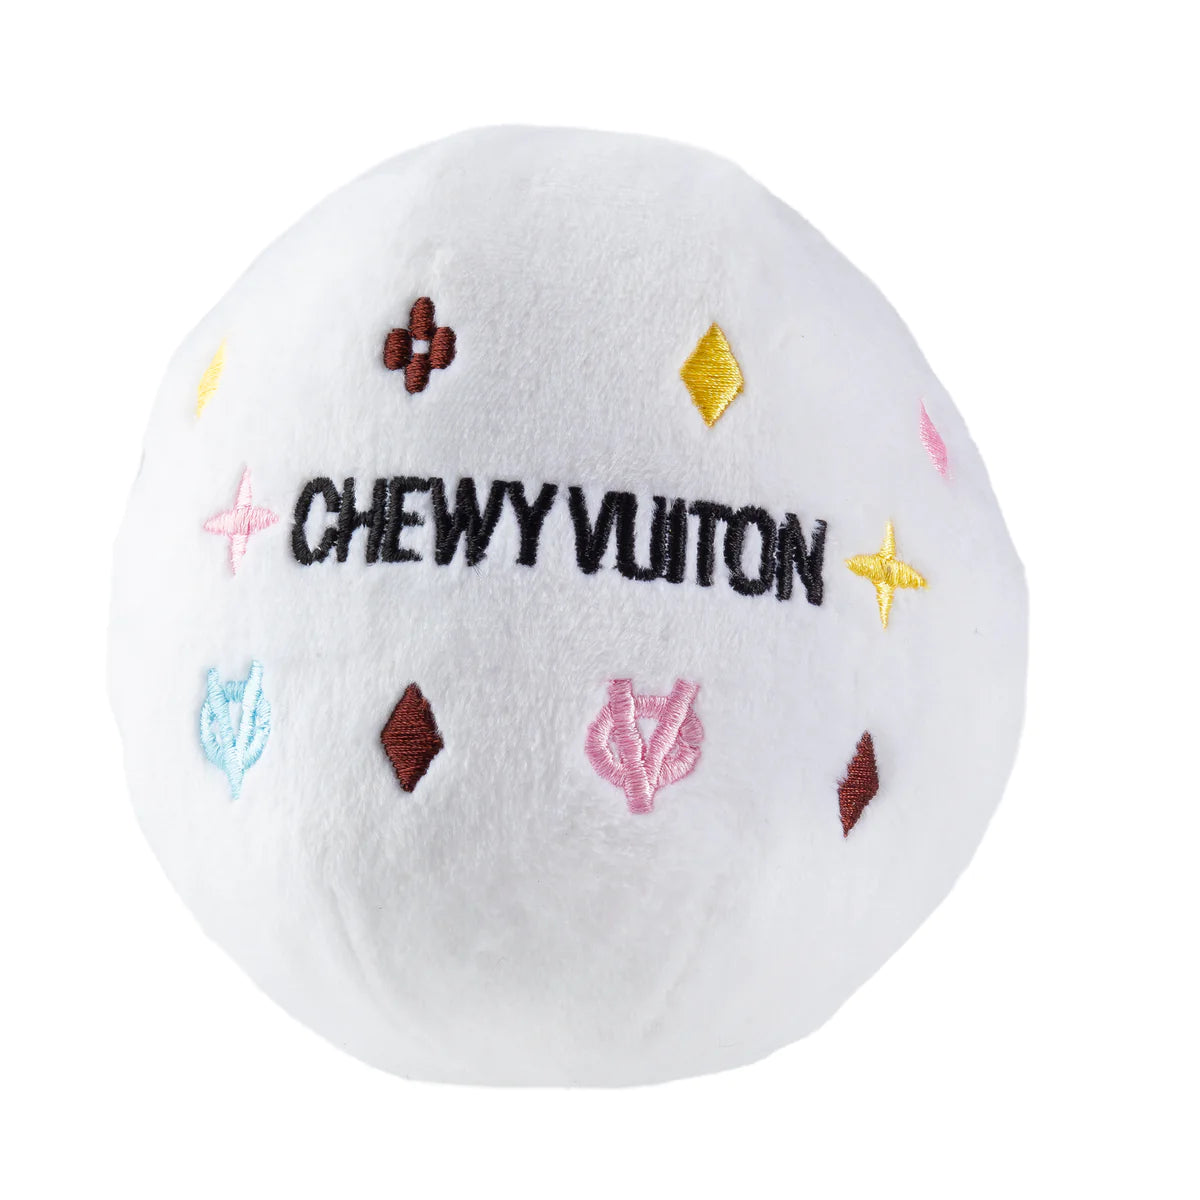 Haute Diggity Dog - White Chewy Vuiton Bone and Ball Squeaker Dog Toy: Large Ball Image